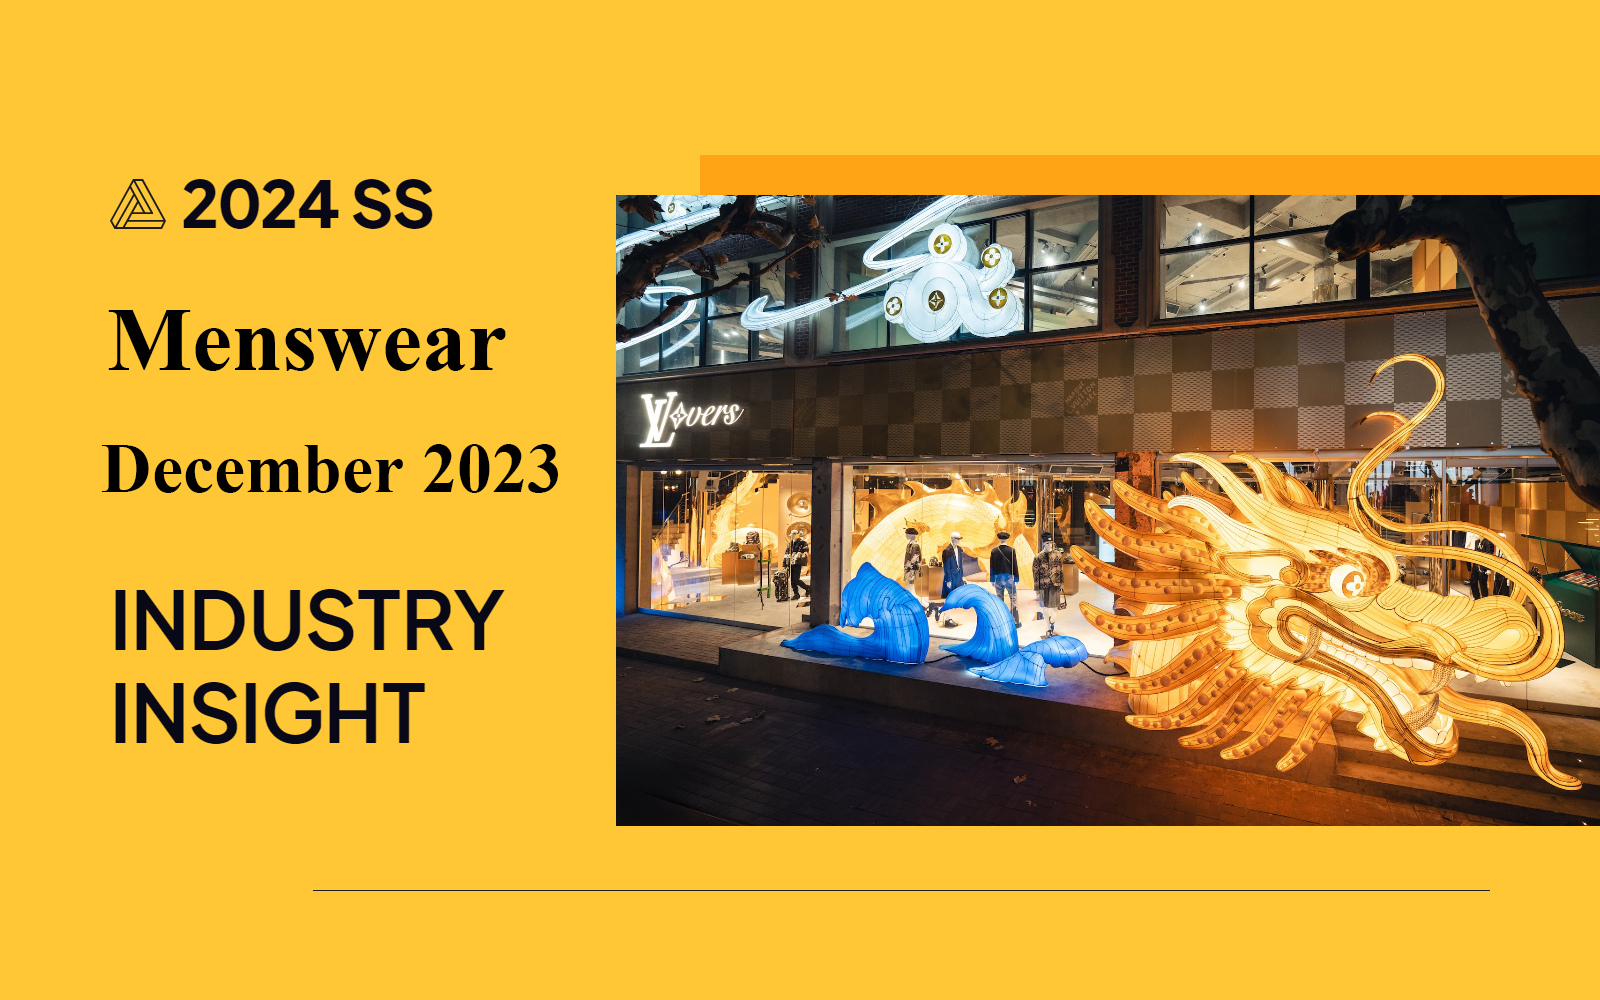 December 2023 -- The Industry Insight of Menswear